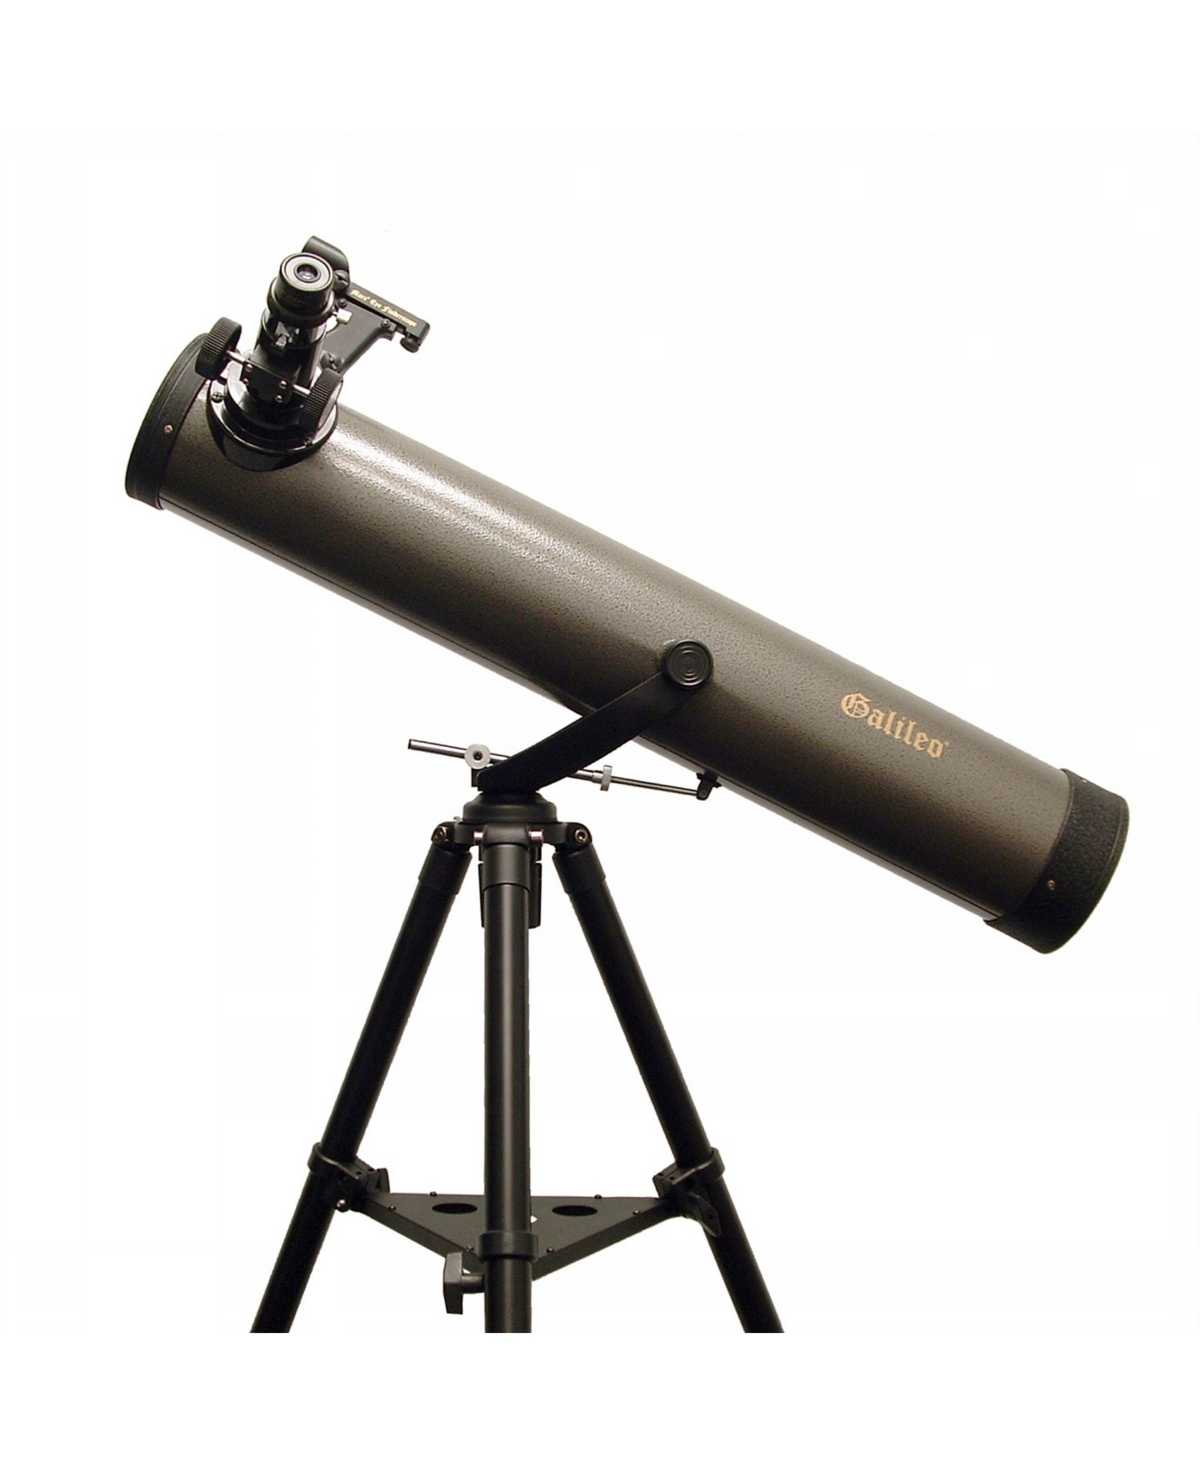 Shop Cosmo Brands Galileo 800 X 80mm Astronomical Telescope And Zoom Eyepiece In Multi